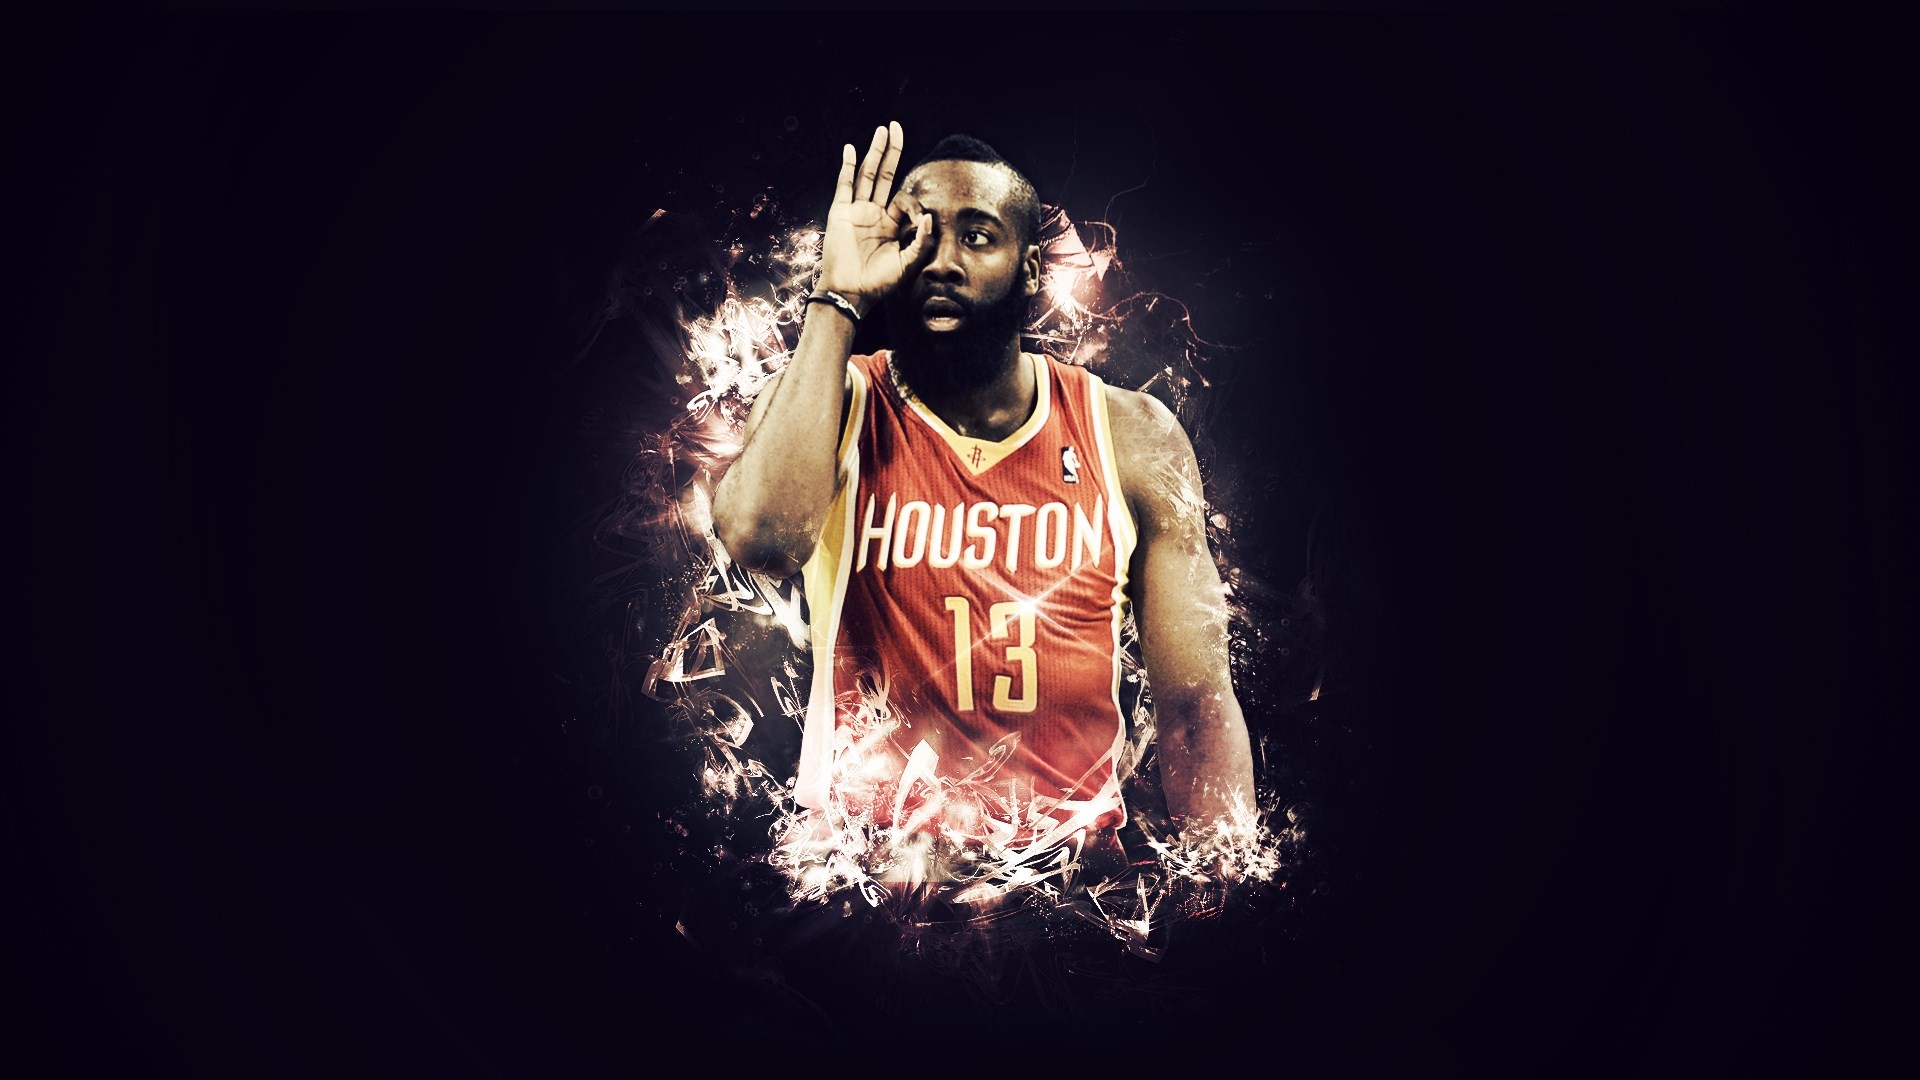 James harden wallpaper full size 2048×1365 1025 kb by hayley